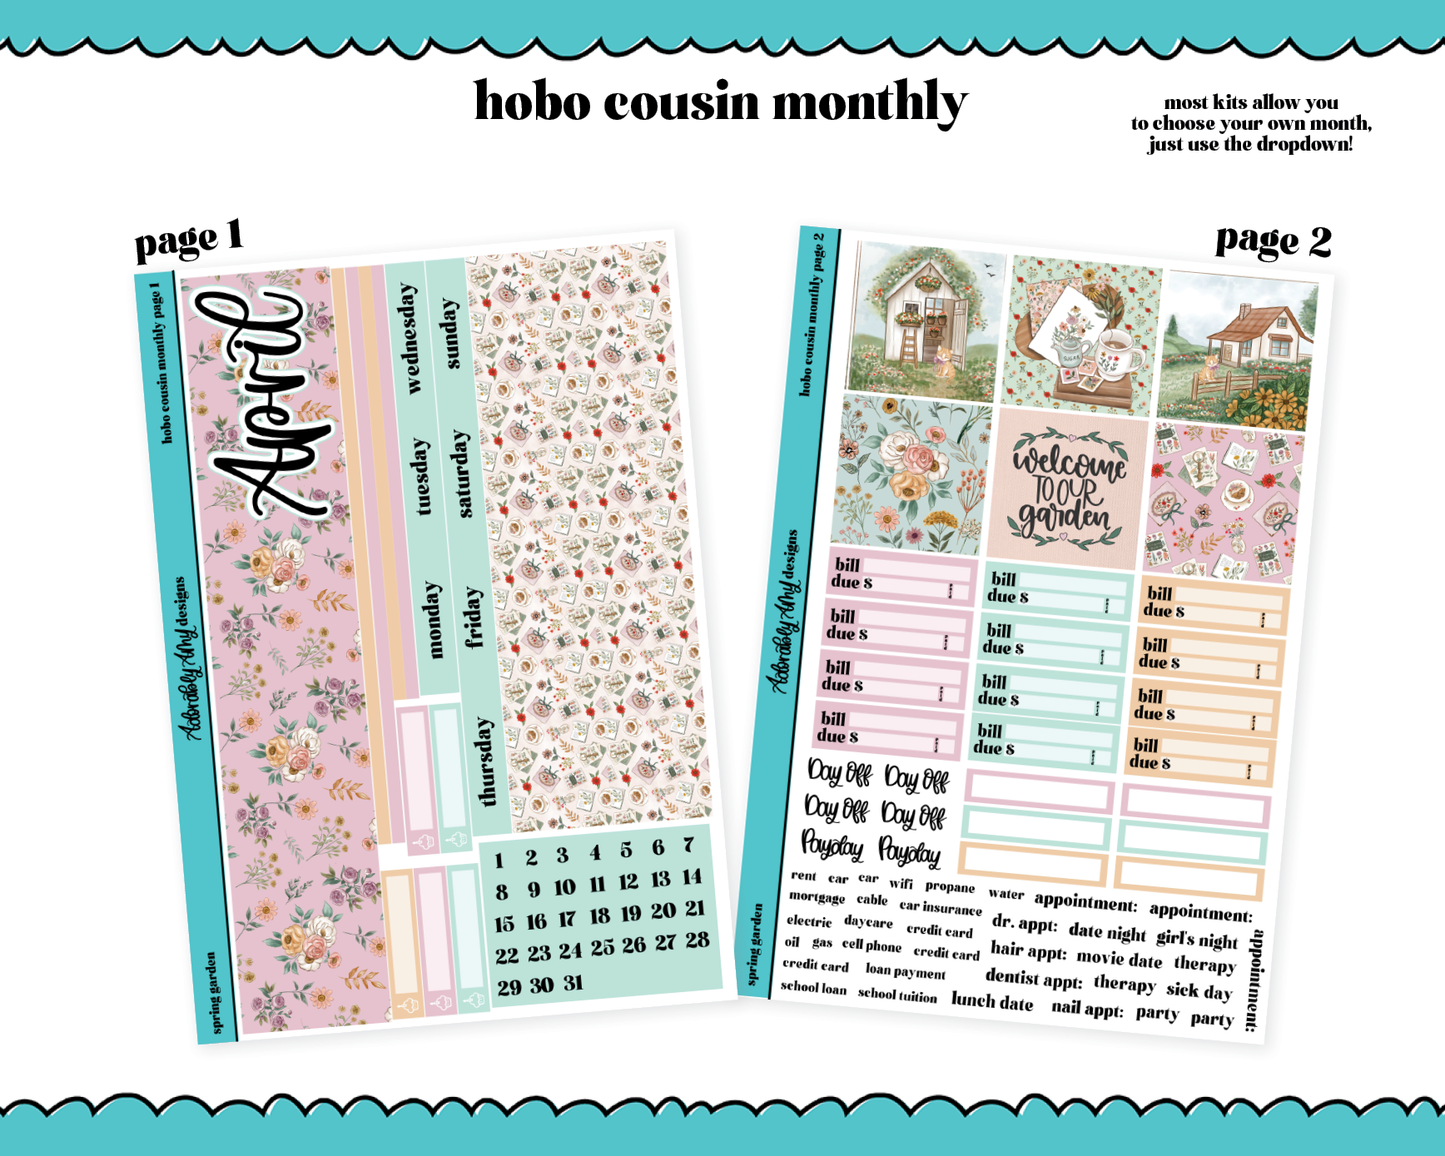 Hobonichi Cousin Monthly Pick Your Month Spring Garden Planner Sticker Kit for Hobo Cousin or Similar Planners